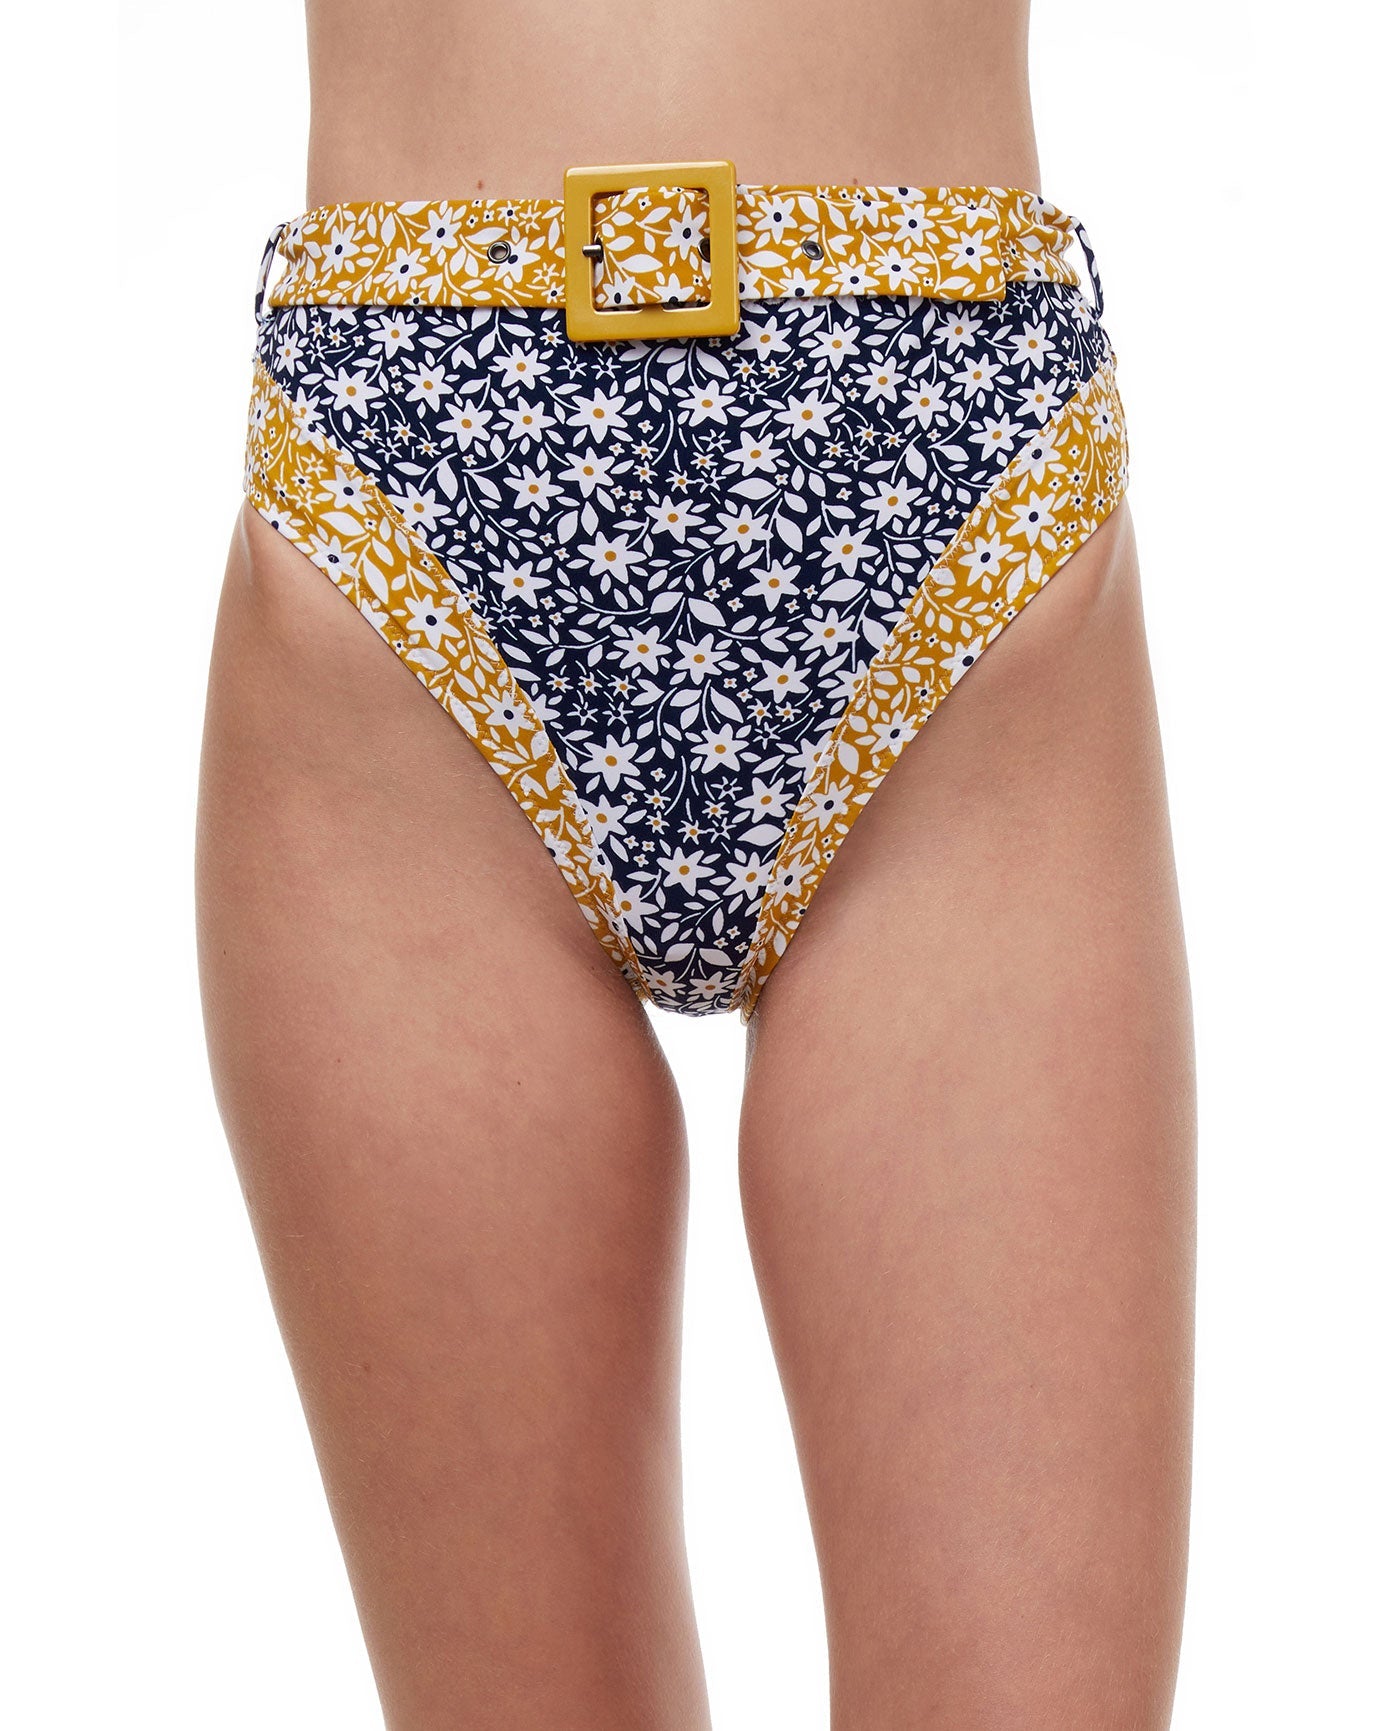 Front View Of Luma Shimmering Daisies High Waist Bikini Bottom | LUMA SHIMMERING DAISIES NAVY AND GOLD